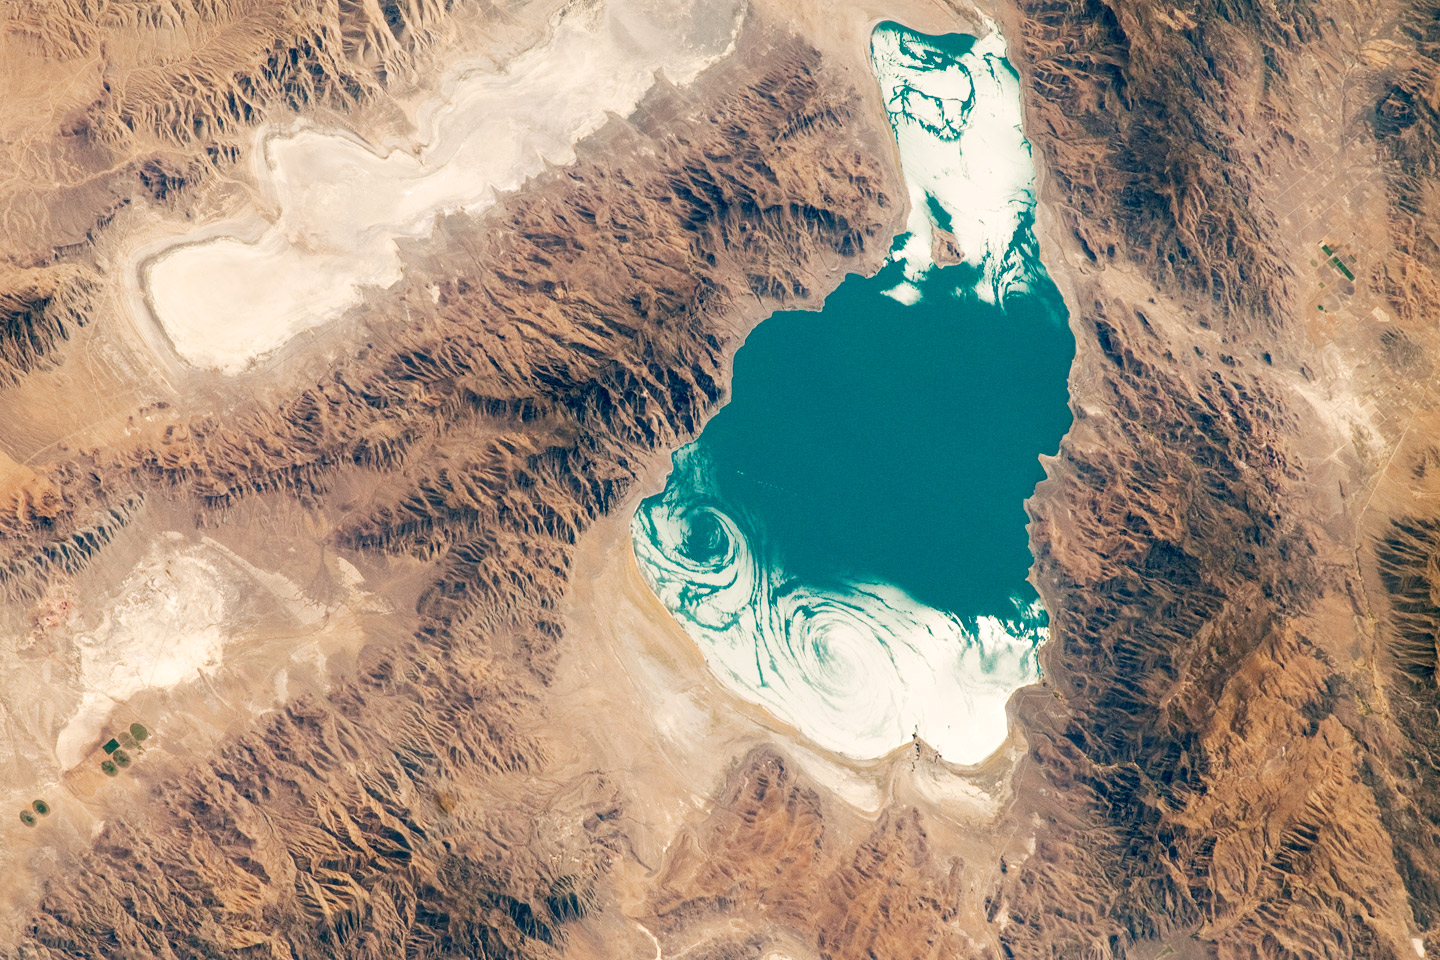 Satellite photo of Pyramid Lake, Nevada. The photo shows an irregularly-shaped lake at center right; part of the lake surface is blue, but but ends have swirls of white. Surrounding the lake, the landscape has a series of mountains ranges separated by dry basins. A few small, circular patches of green irrigated land can be see at the lower left.